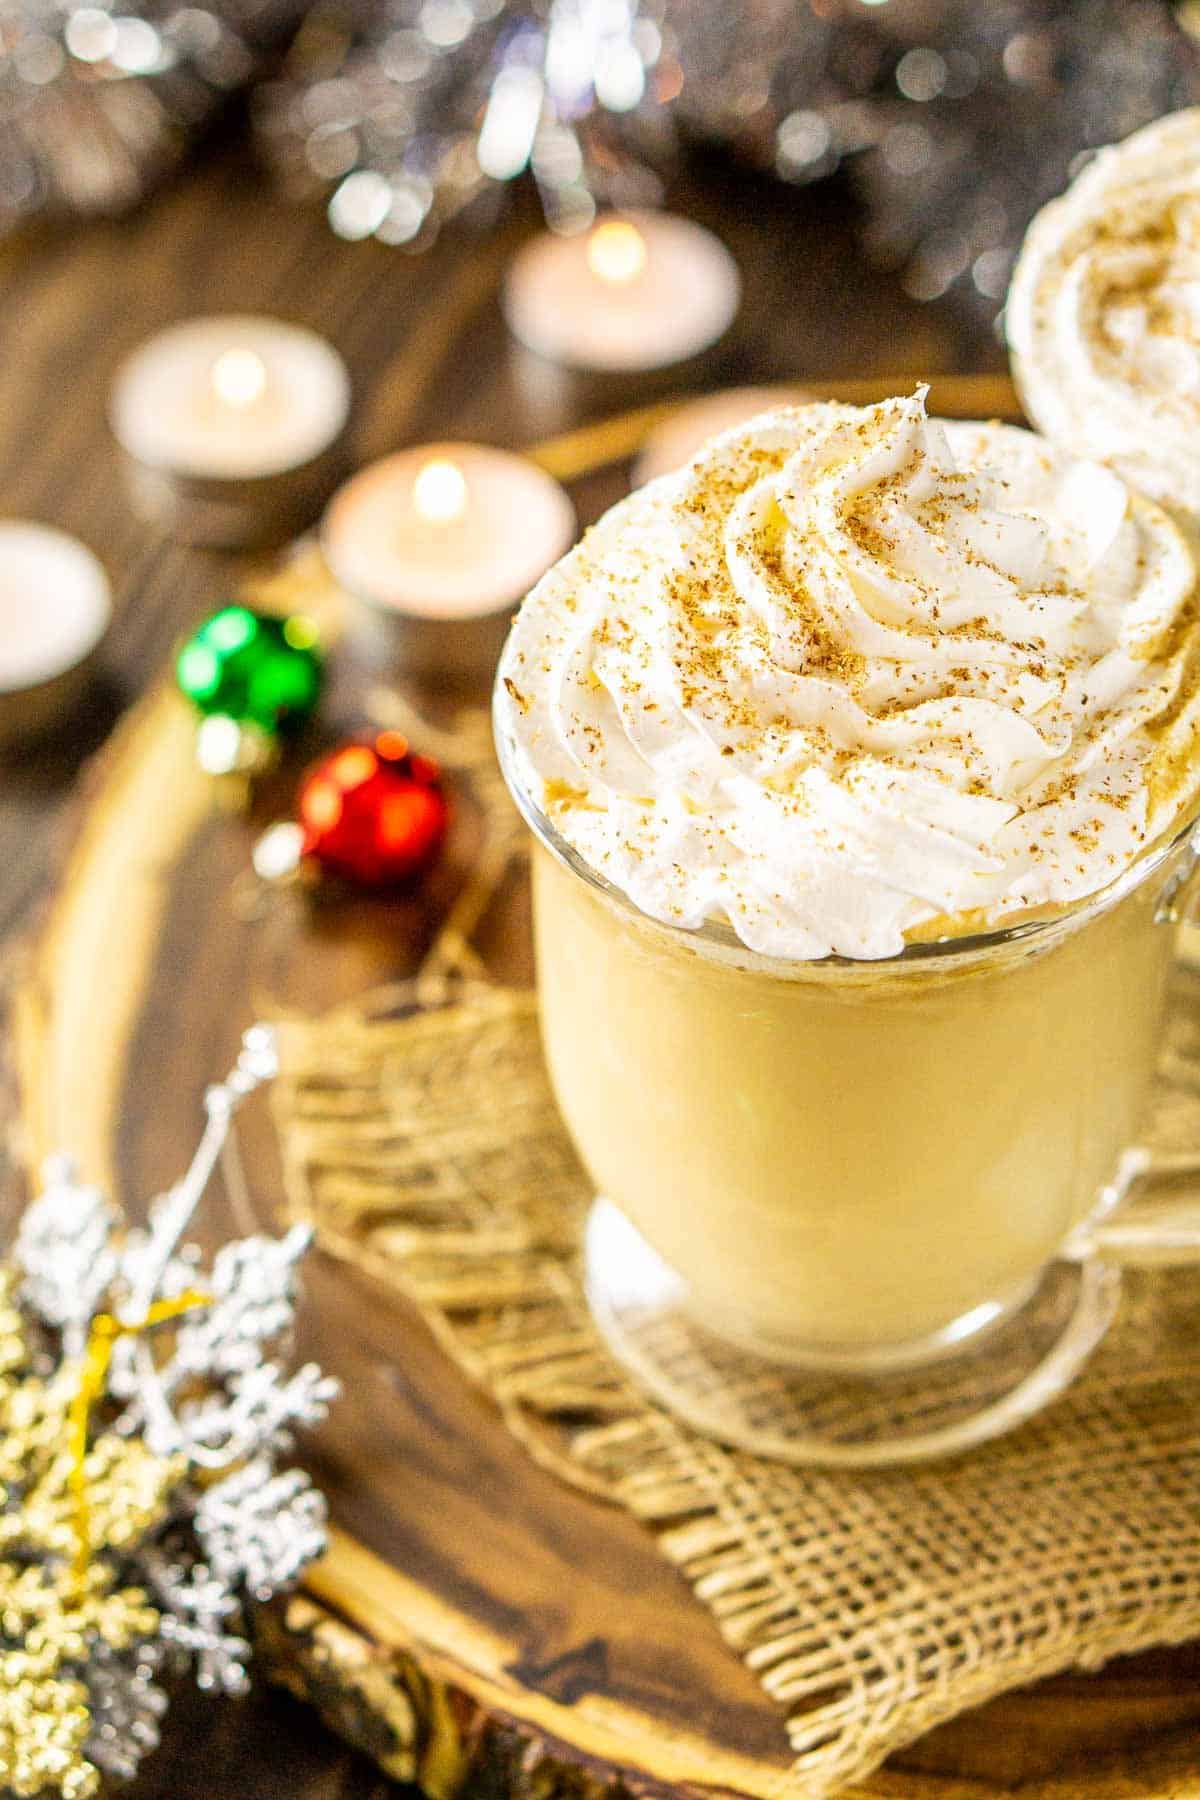 A close-up of an eggnog latte with Christmas ornaments and candles around it.